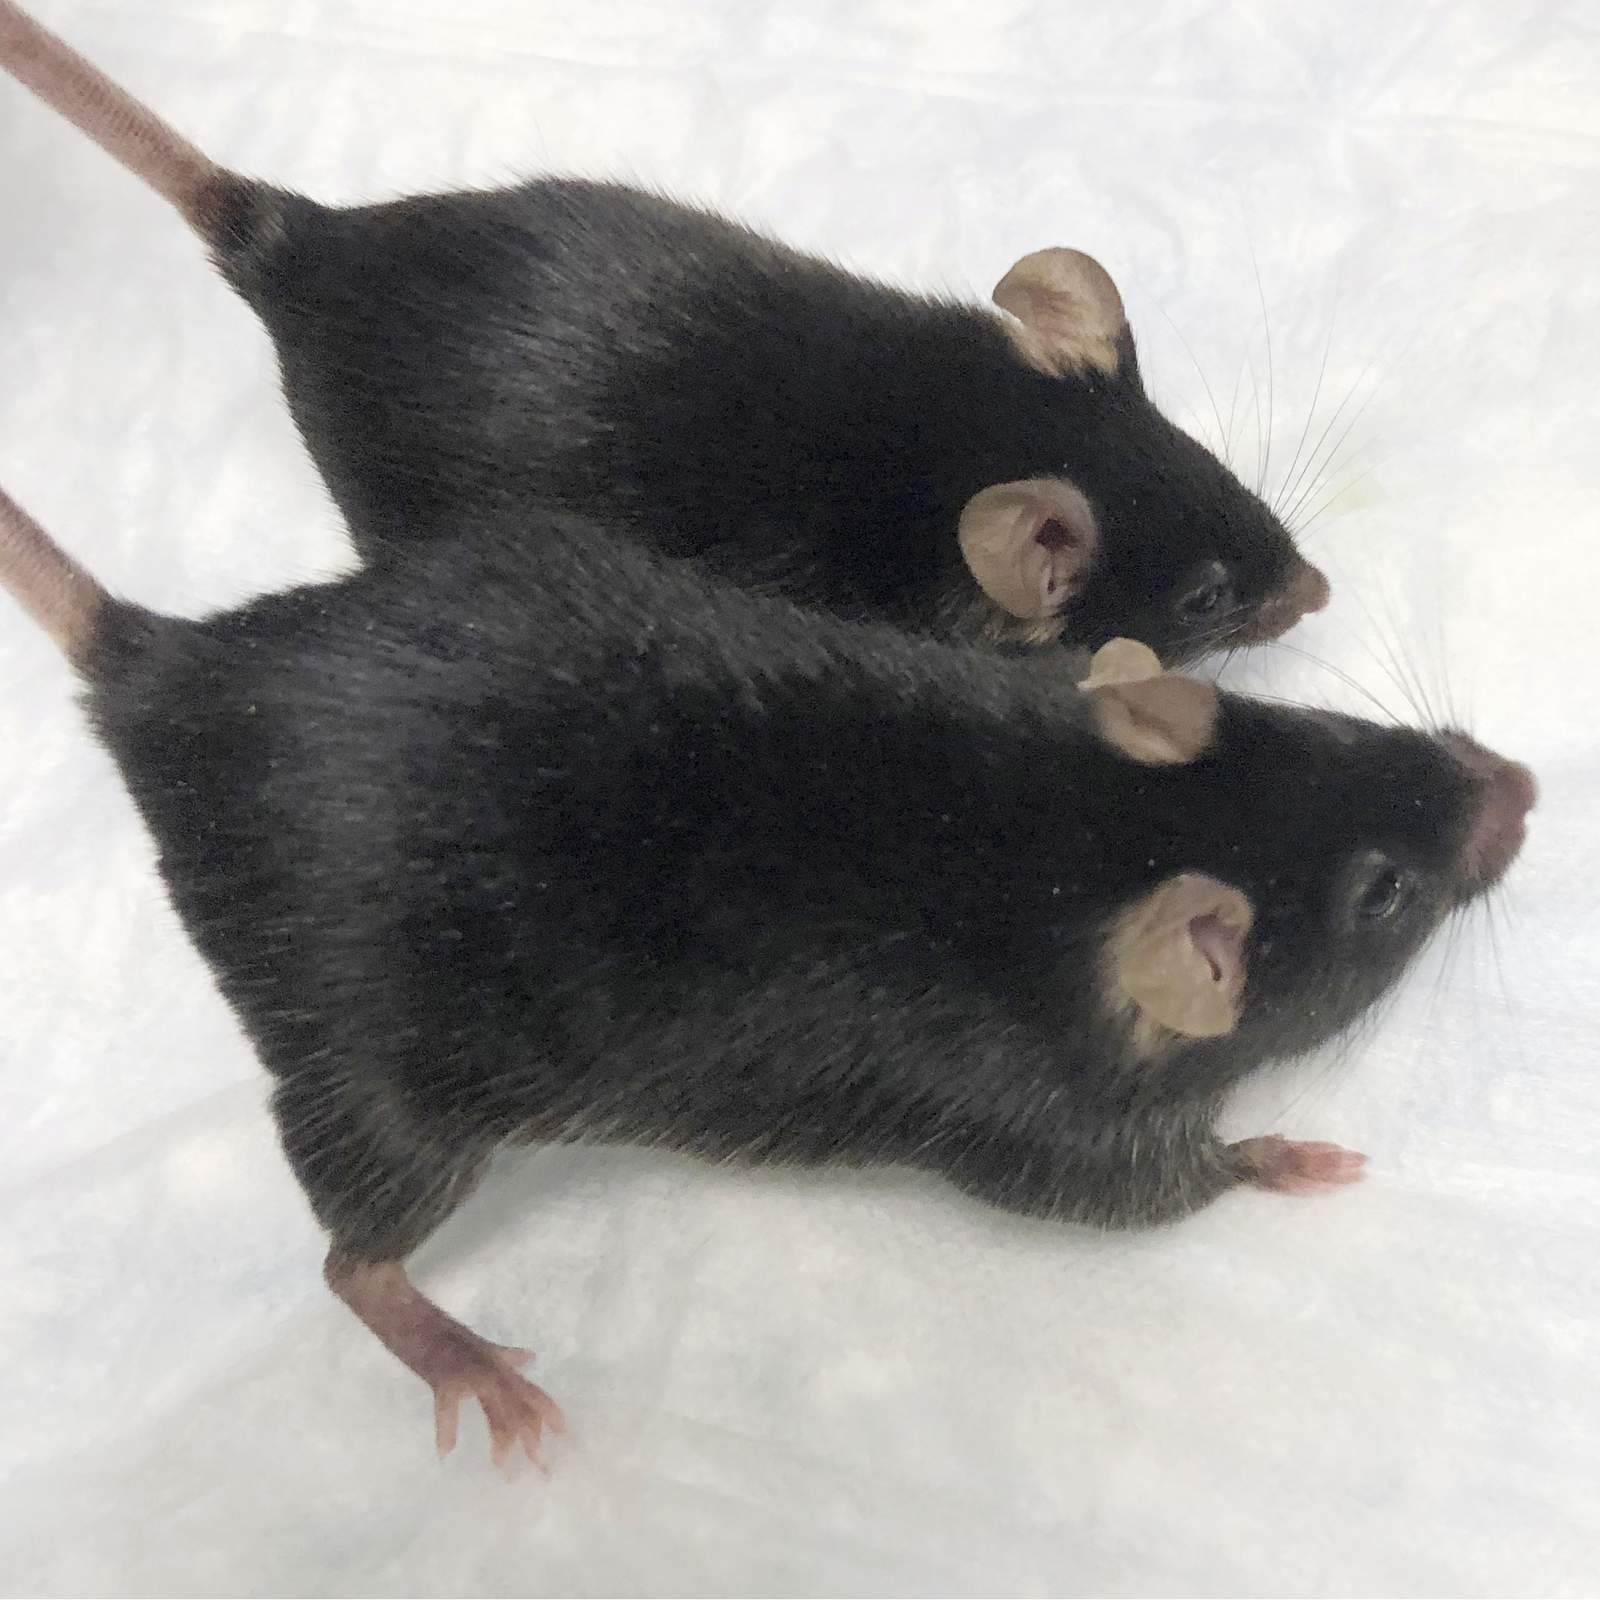 'Mighty mice' stay musclebound in space, boon for astronauts